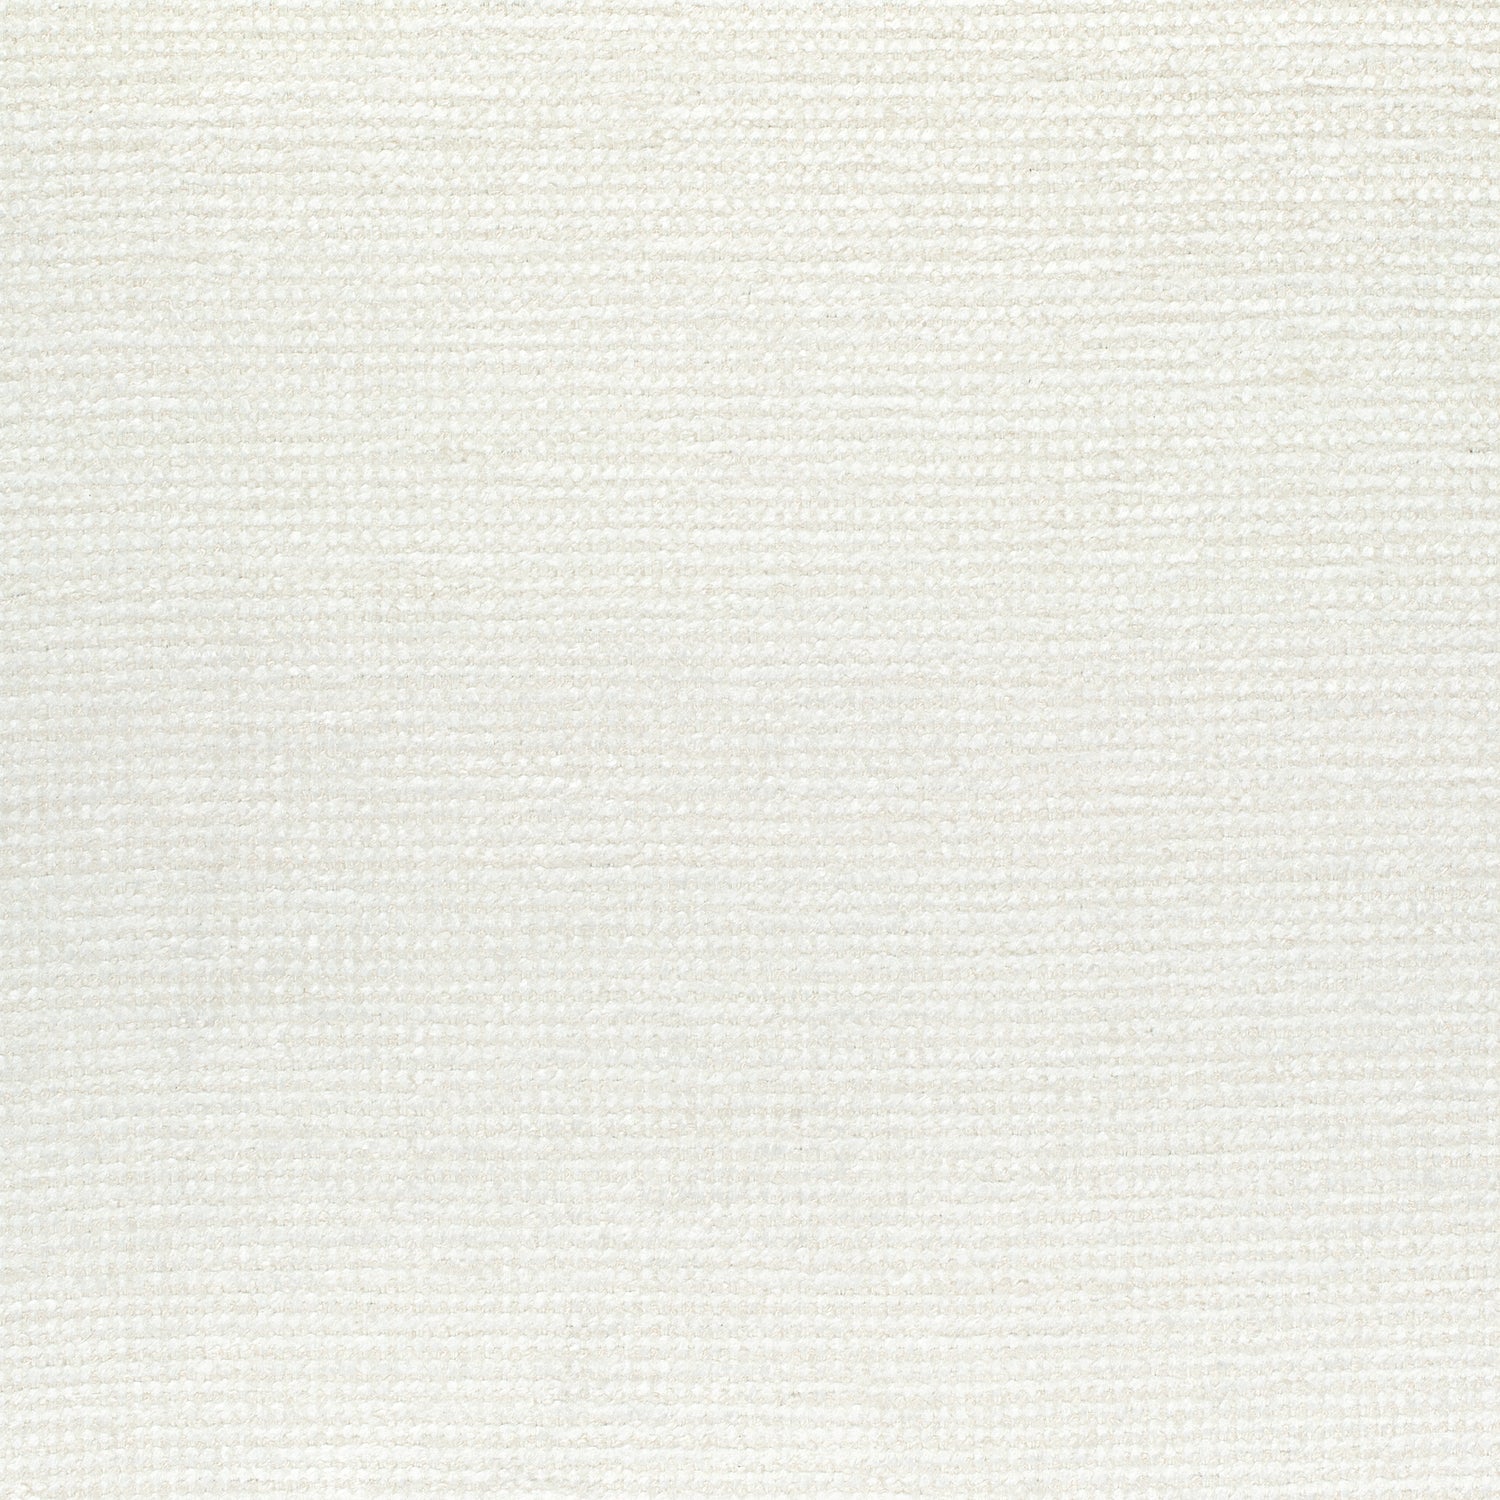 Milo fabric in almond color - pattern number W73318 - by Thibaut in the Nomad collection